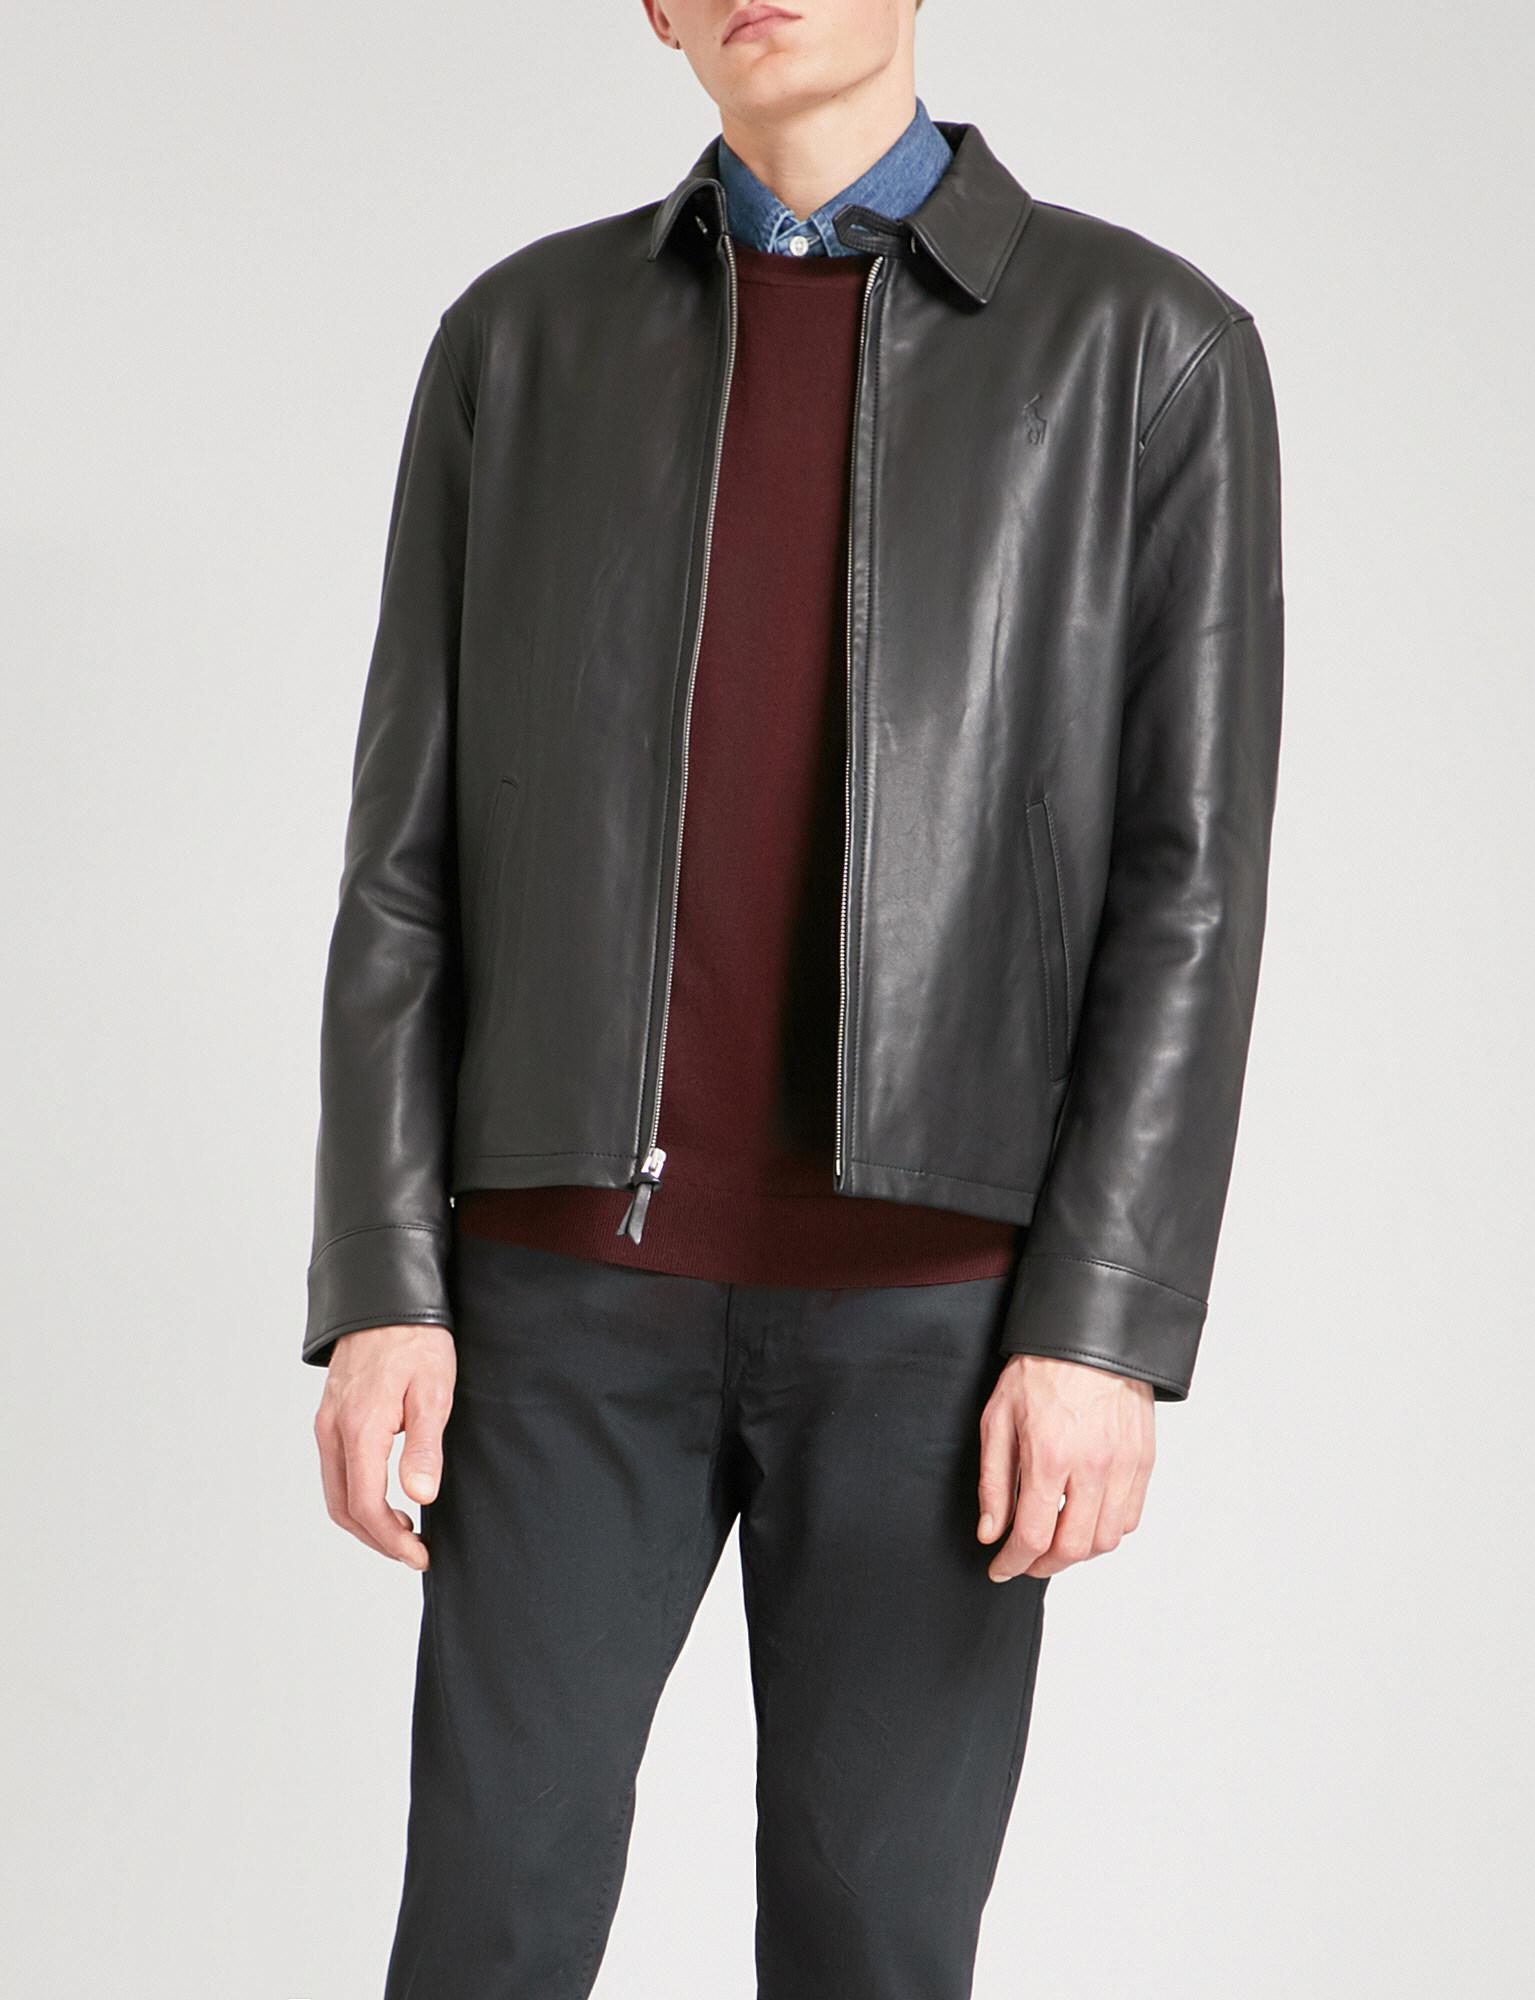 Polo Ralph Lauren Maxwell Leather Jacket in Black for Men - Lyst